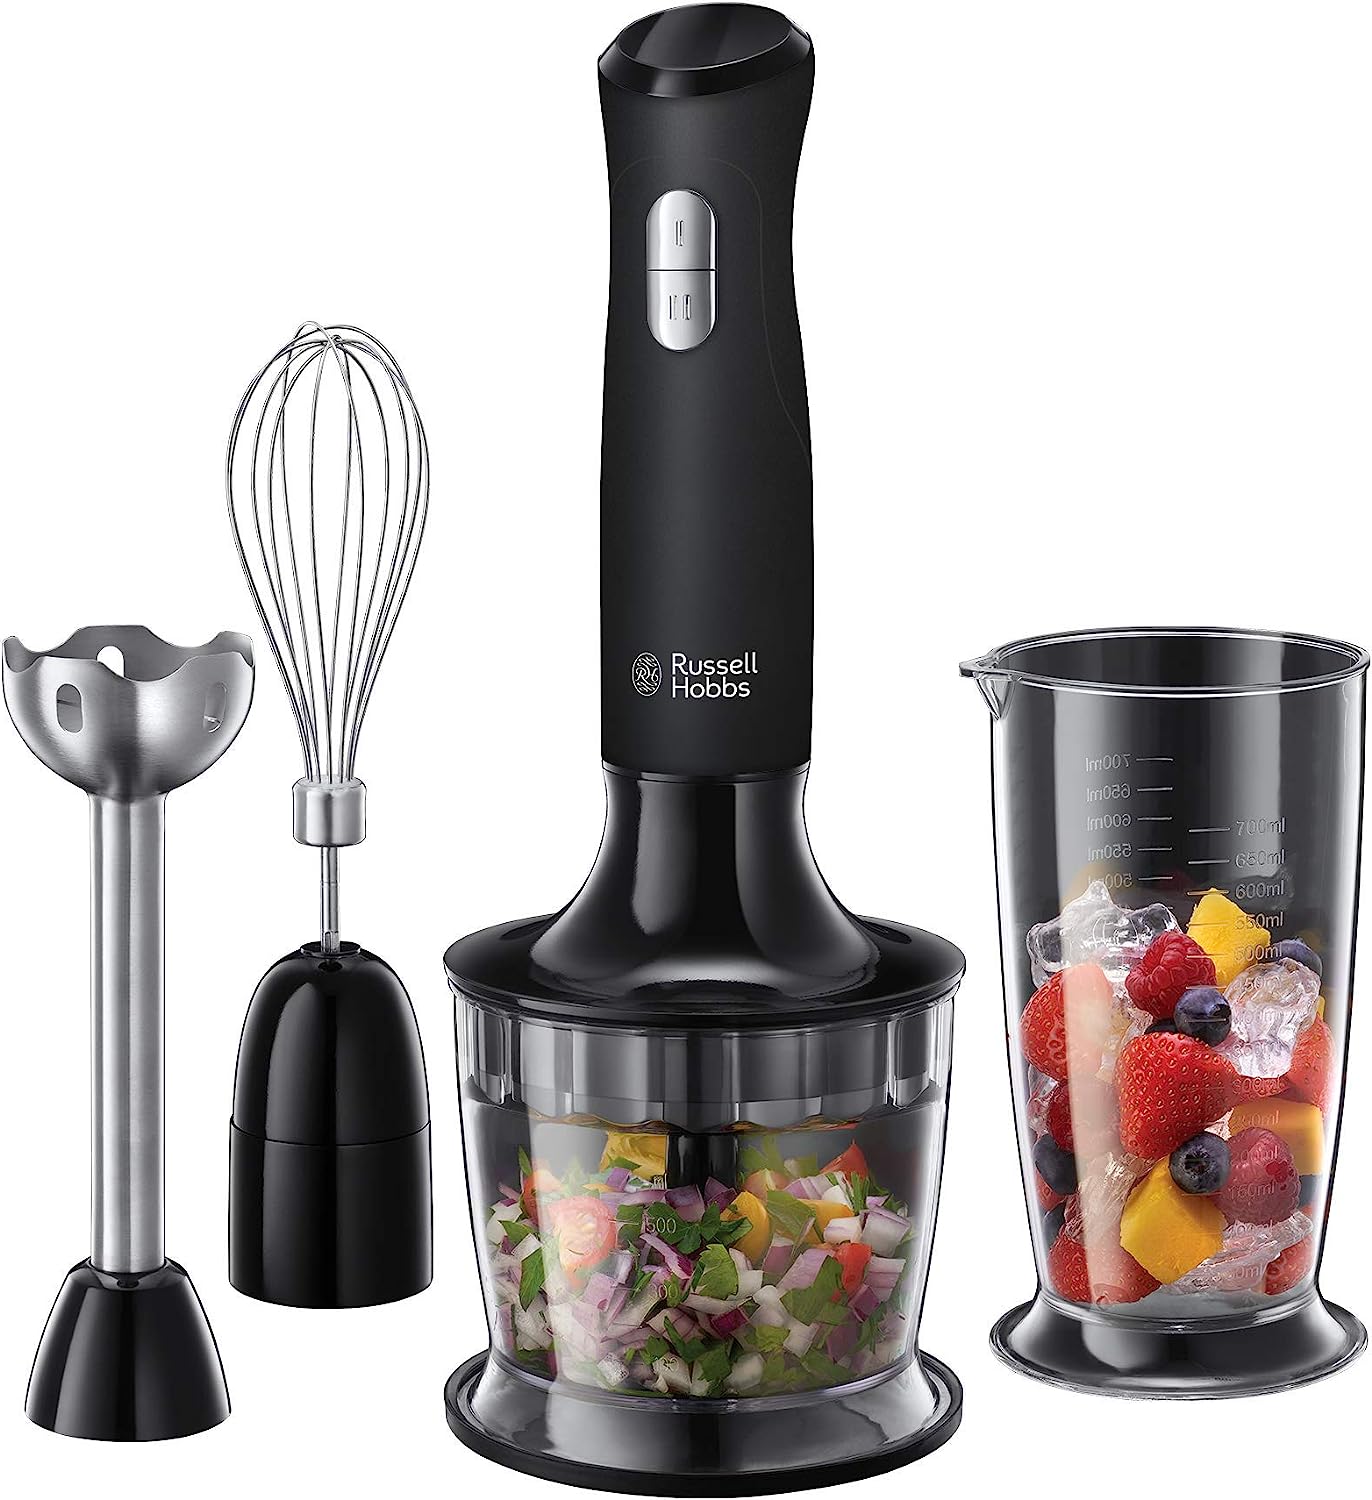 Russell Hobbs 24702 Desire 3-in-1 Hand Blender with Electric Whisk and Vegetable Chopper Attachments Matte Black